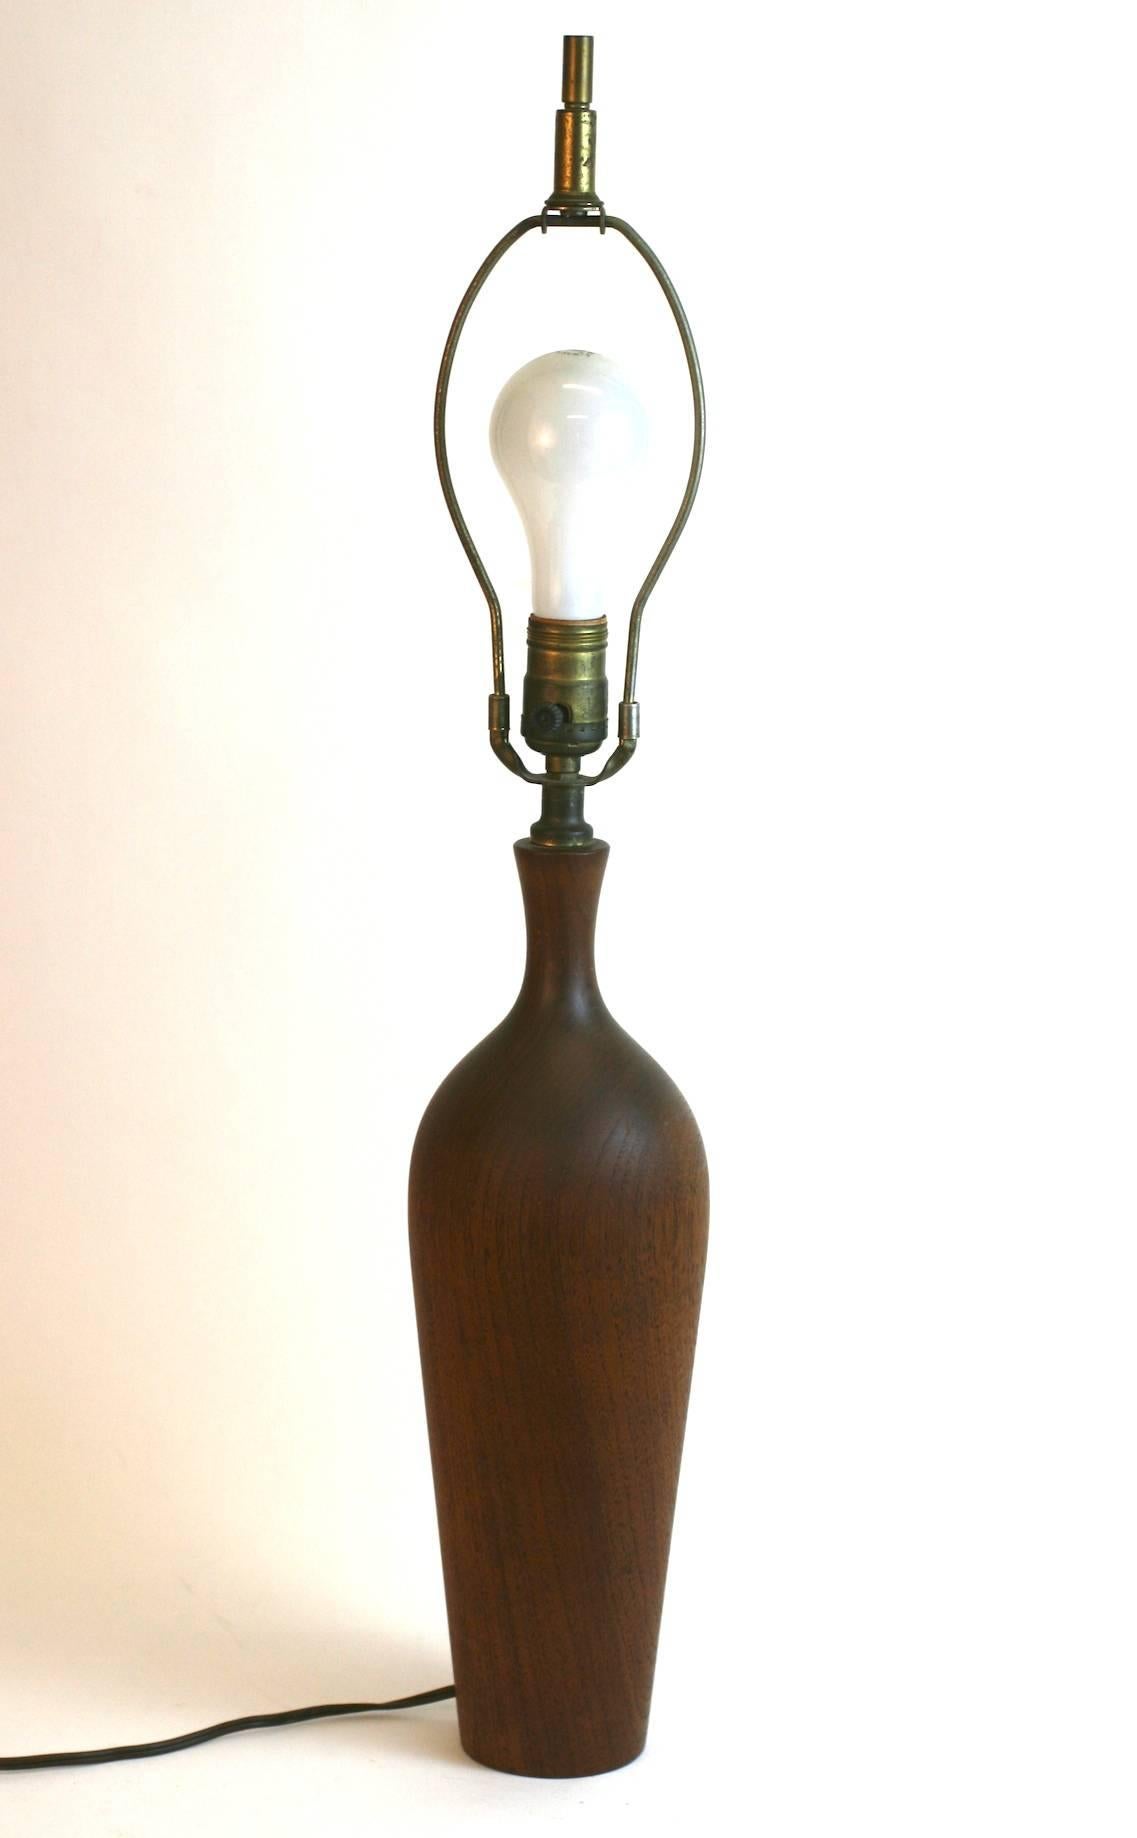 Elegant turned wood Modernist lamp which highlights the grain of the walnut. Shade not included. 1950s, USA. 
28